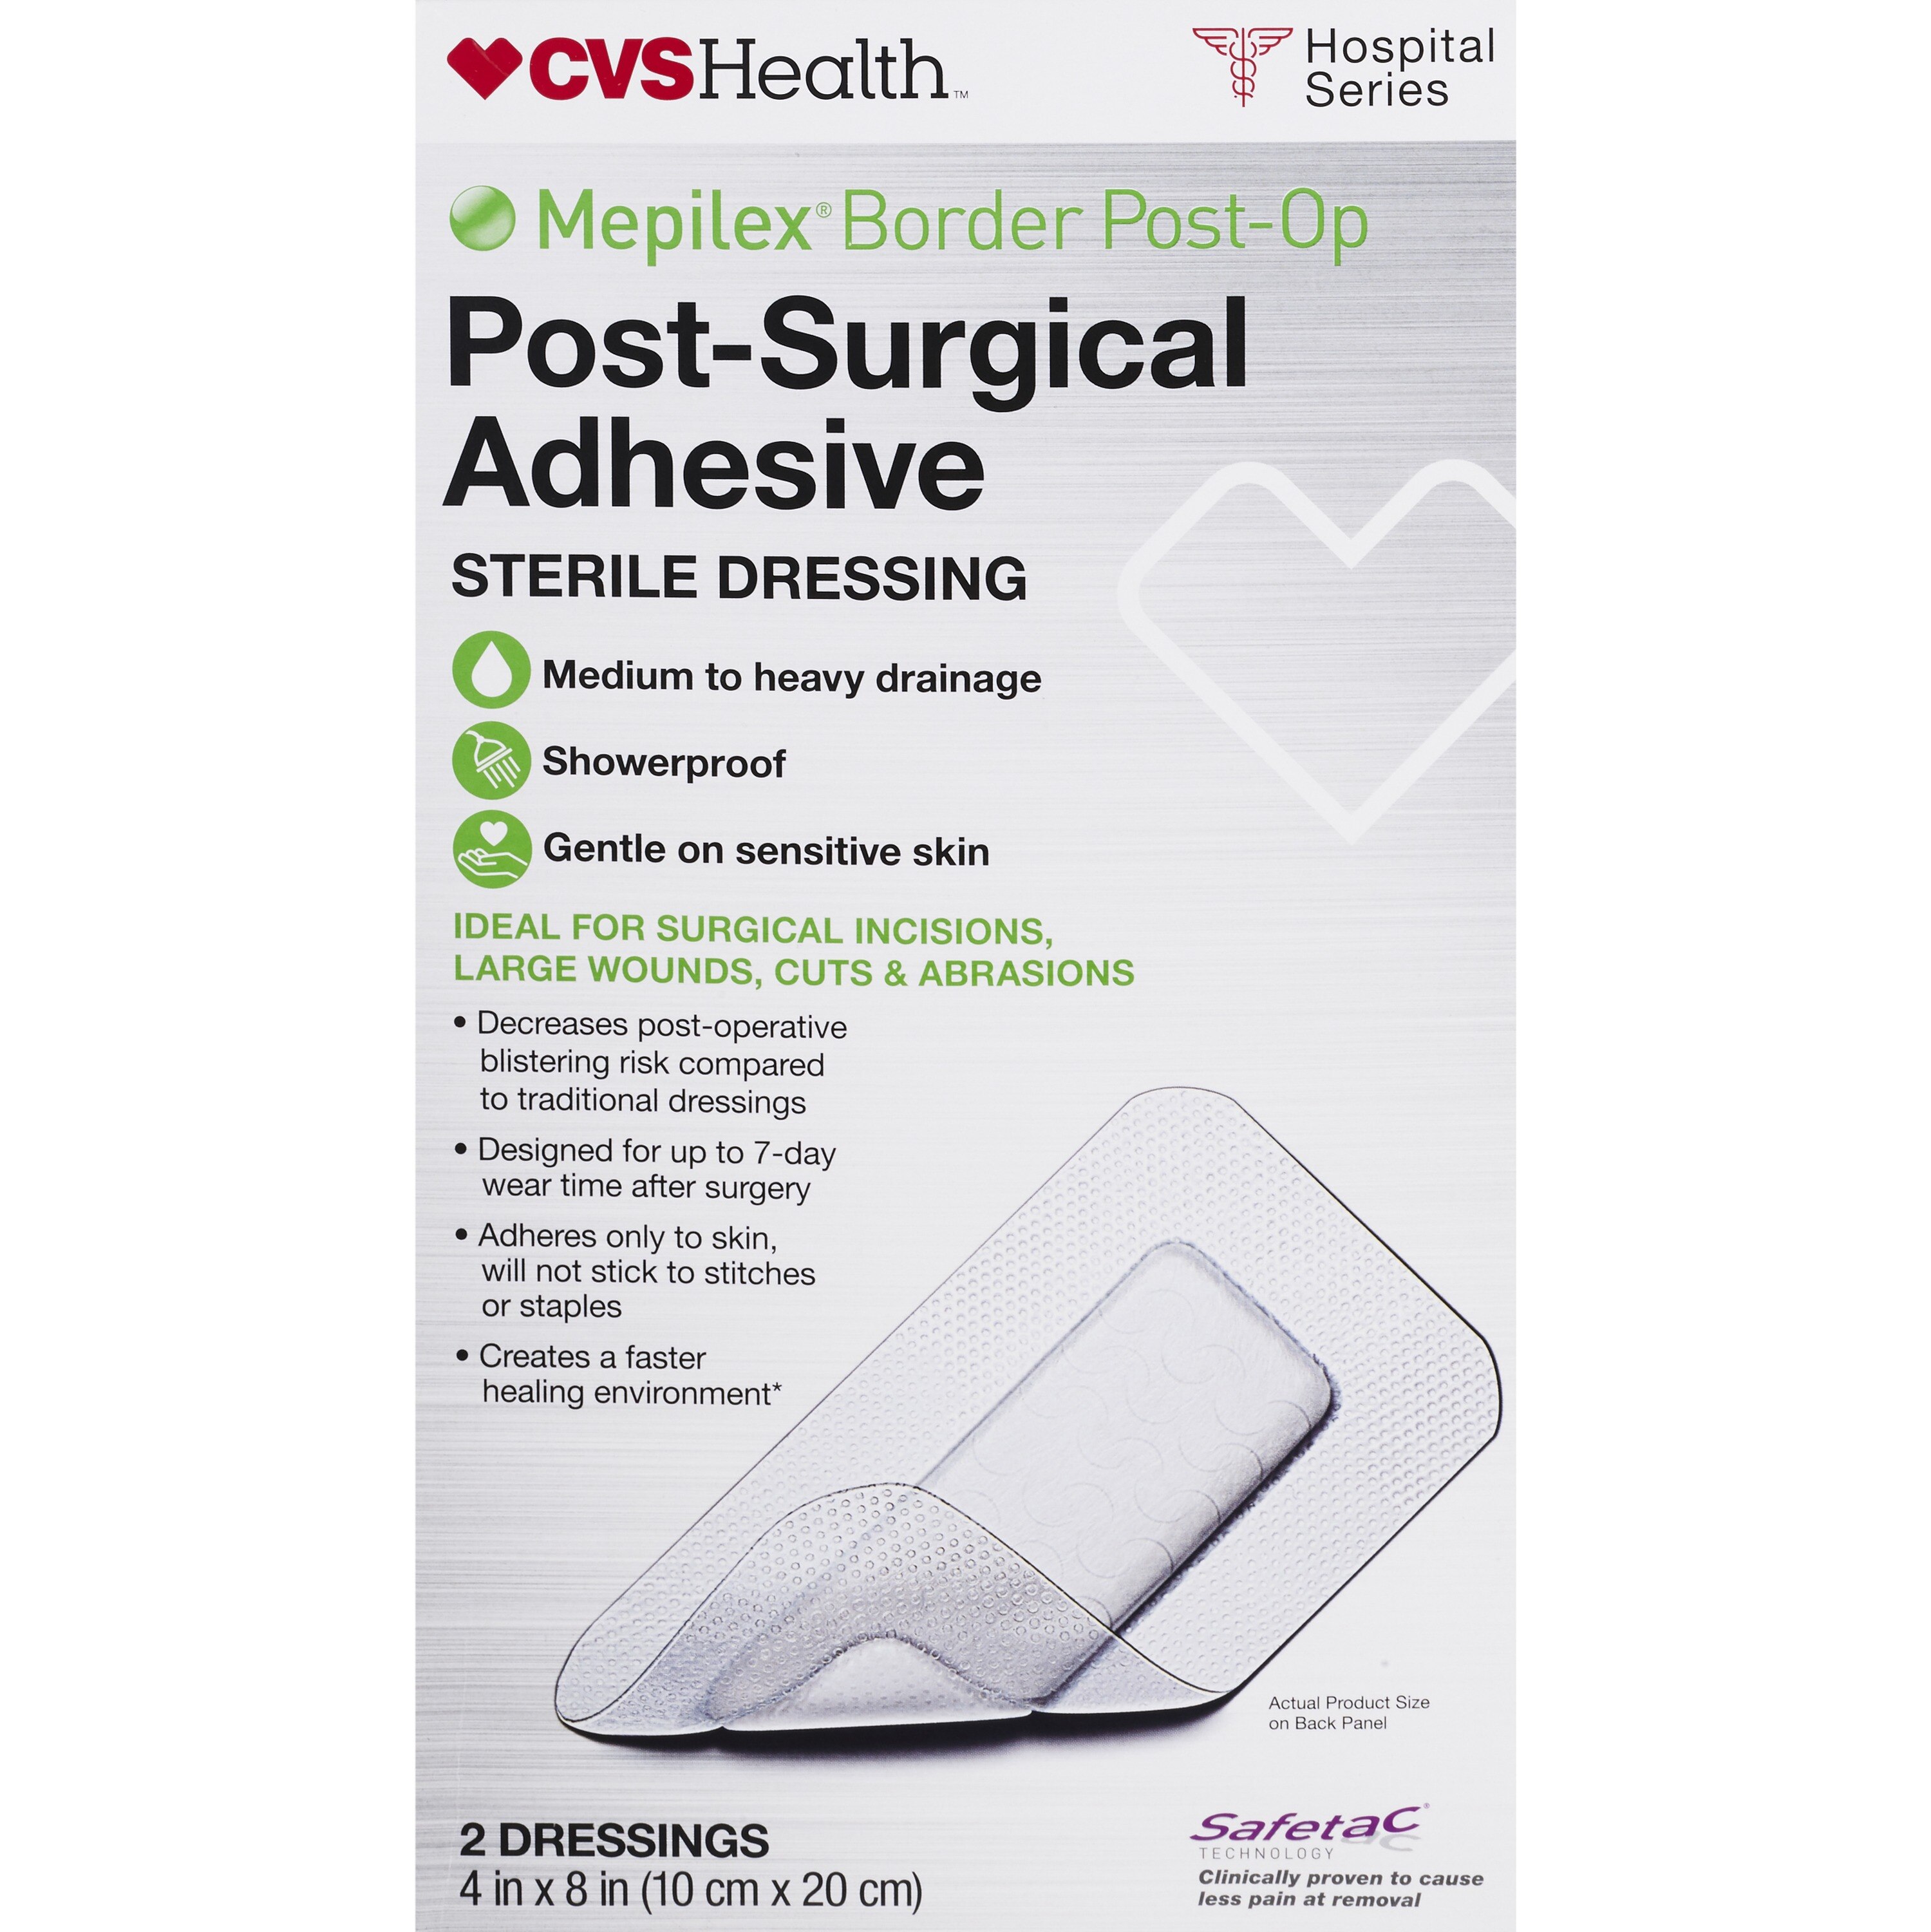 CVS Health Post-Surgical Adhesive Sterile Dressing